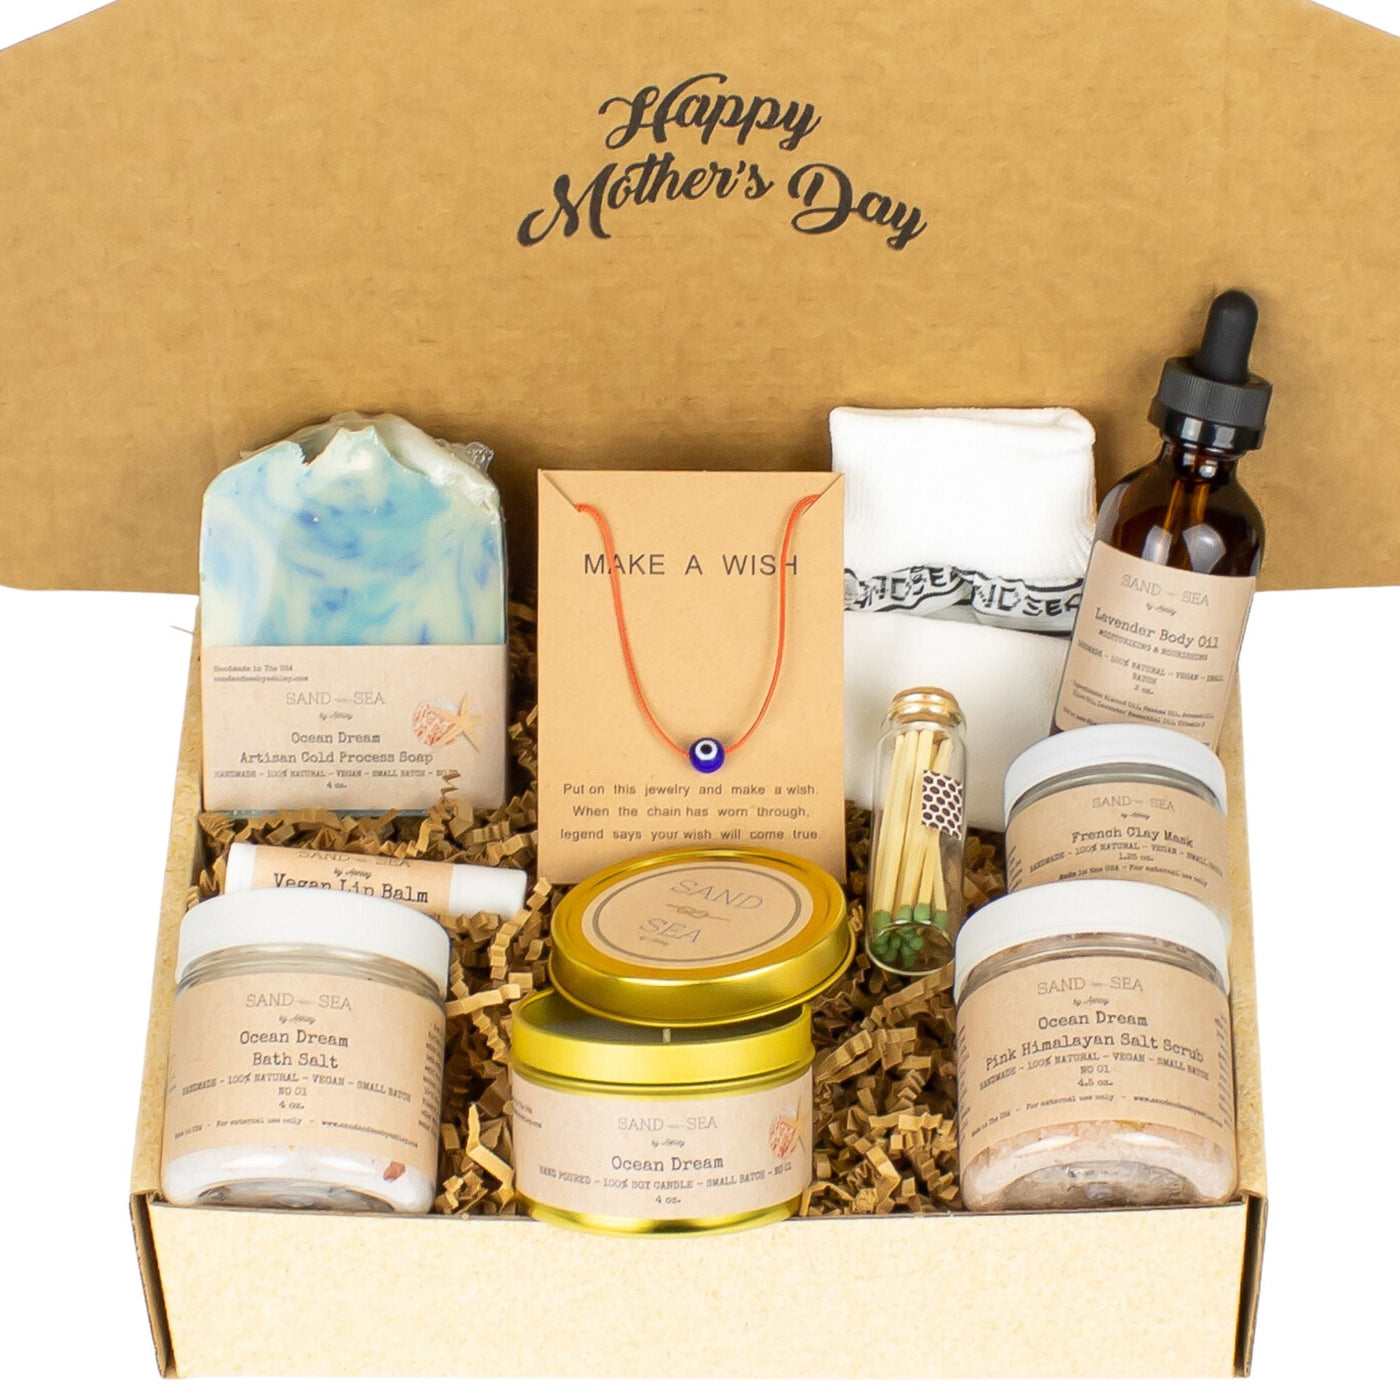 Happy Mothers Day Gift Baskets - Spa Self Care Package for Women 10 pc - Sand & Sea by Ashley